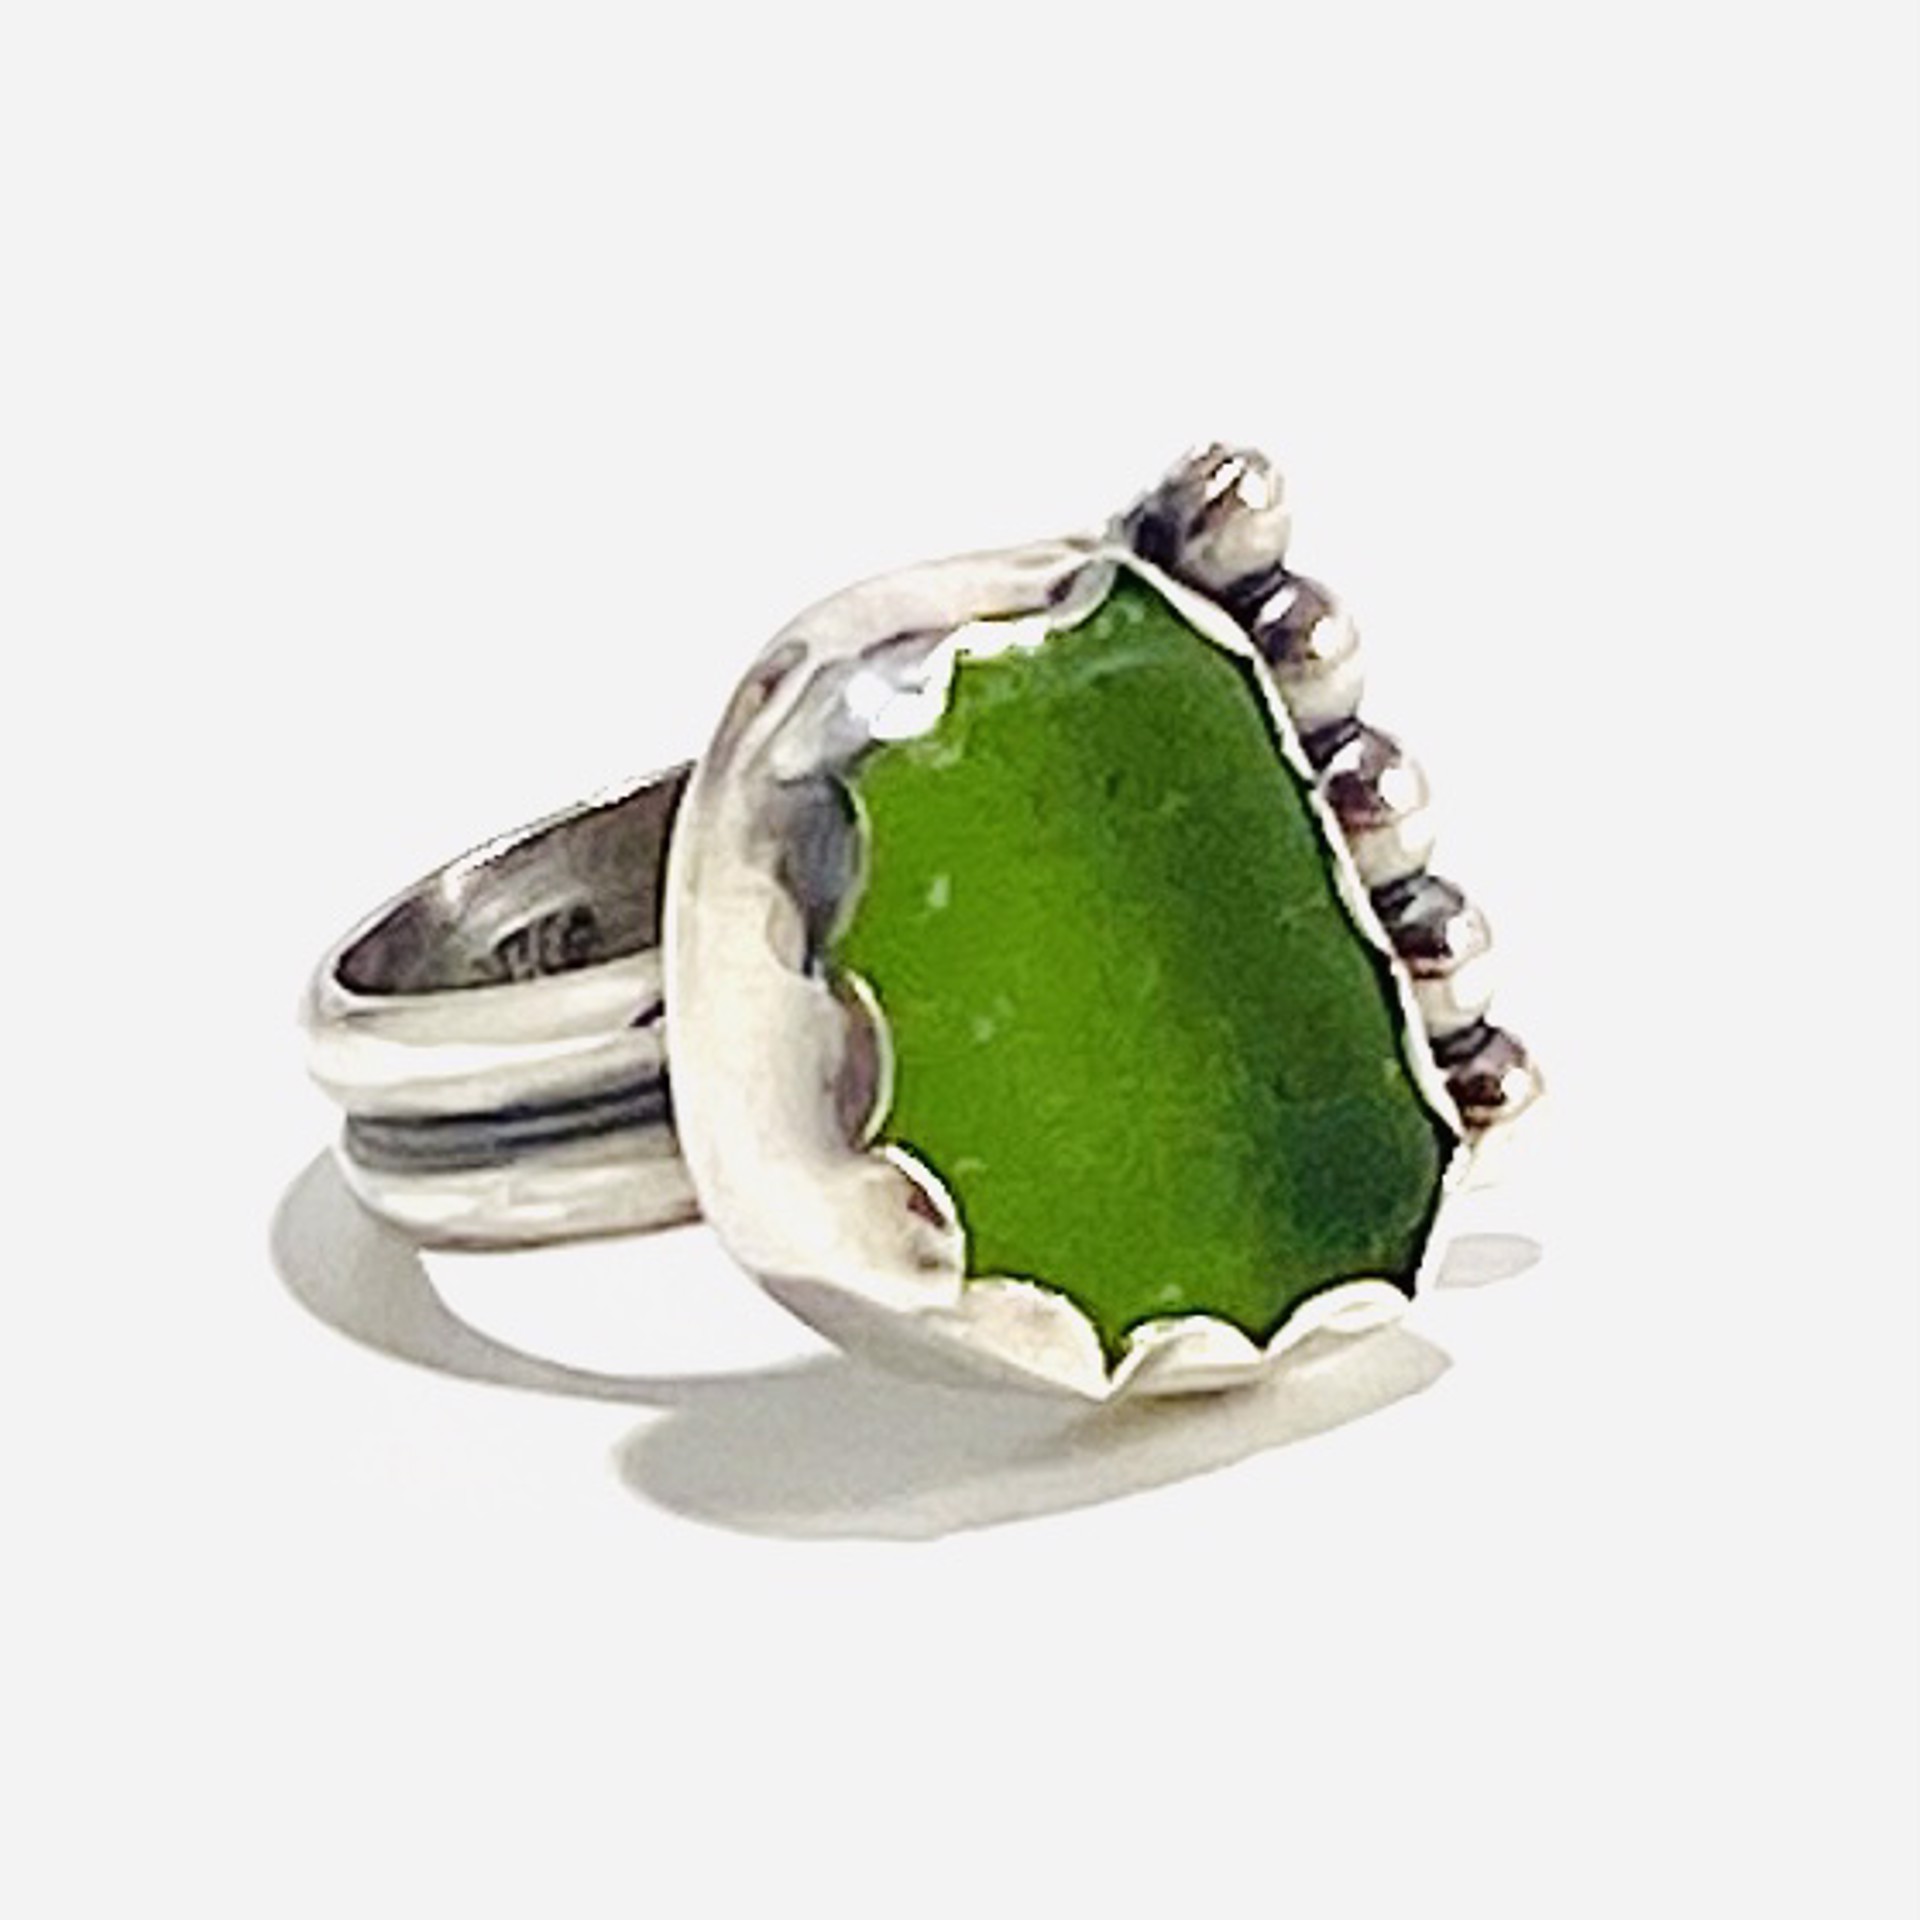 AB23-12 Dark Green Sea Glass Five Bead Accent Ring sz6.75 by Anne Bivens